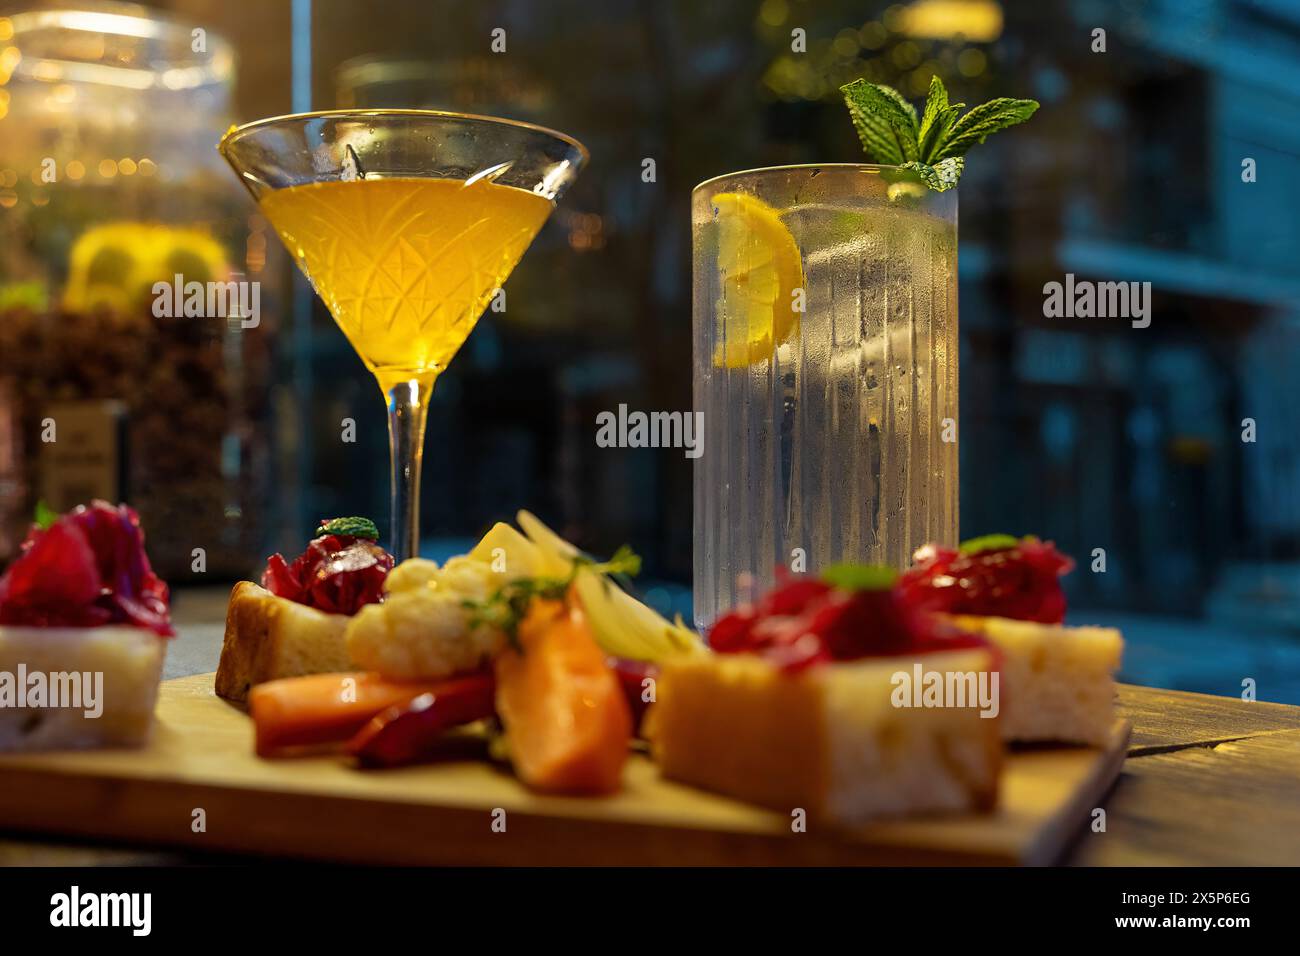 Cocktails and appetizers on a wooden board - gourmet bruschetta, refreshing drinks - evening indulgence - elegant glassware, vibrant garnish - dimly l Stock Photo